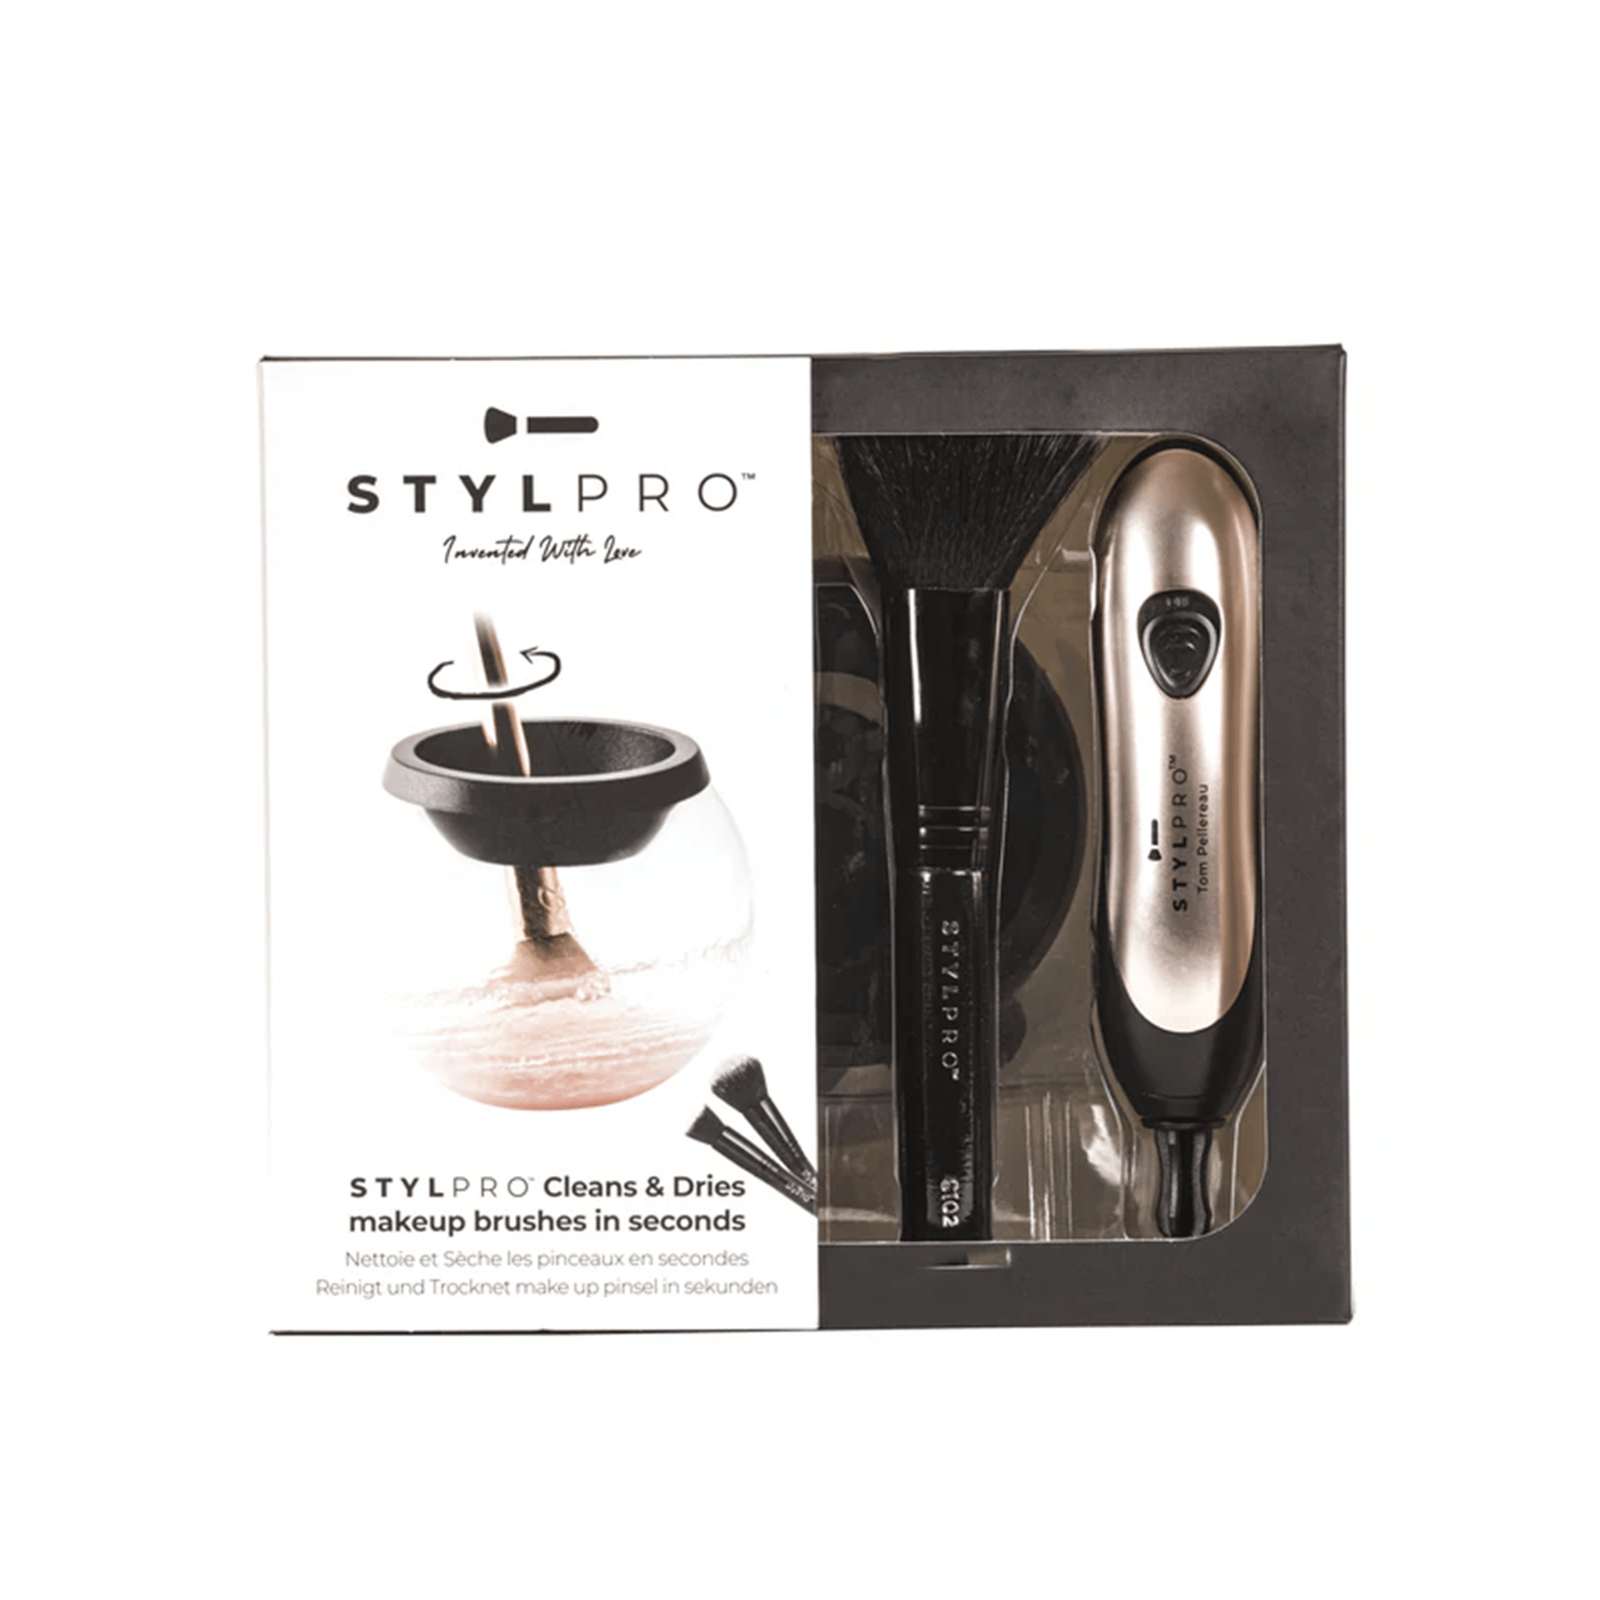 STYLPRO Makeup Brush Cleaner Gift Set